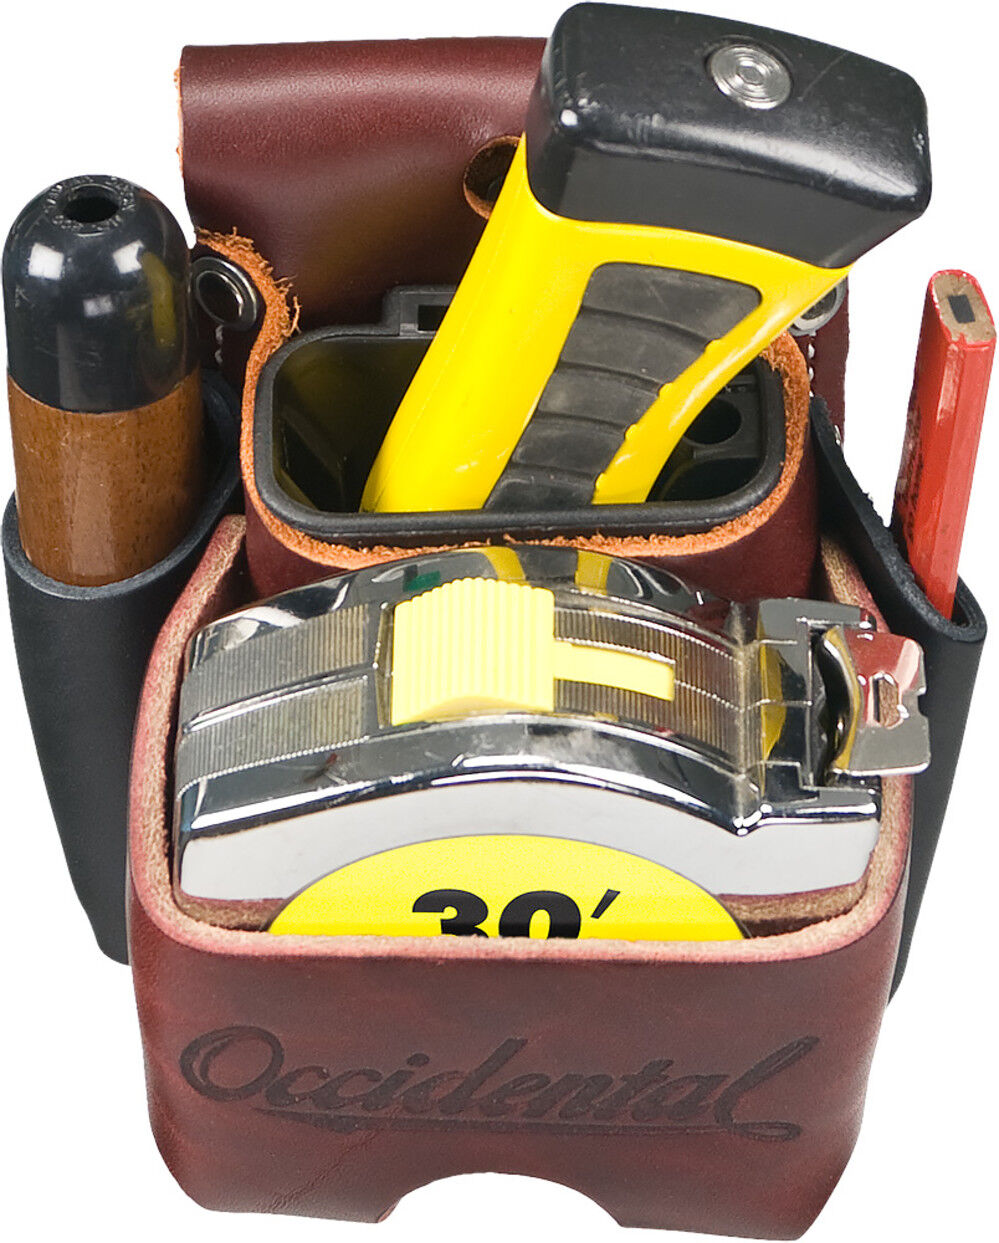 Leather Clip-On 4 in 1 Tool/Tape Holder 5523